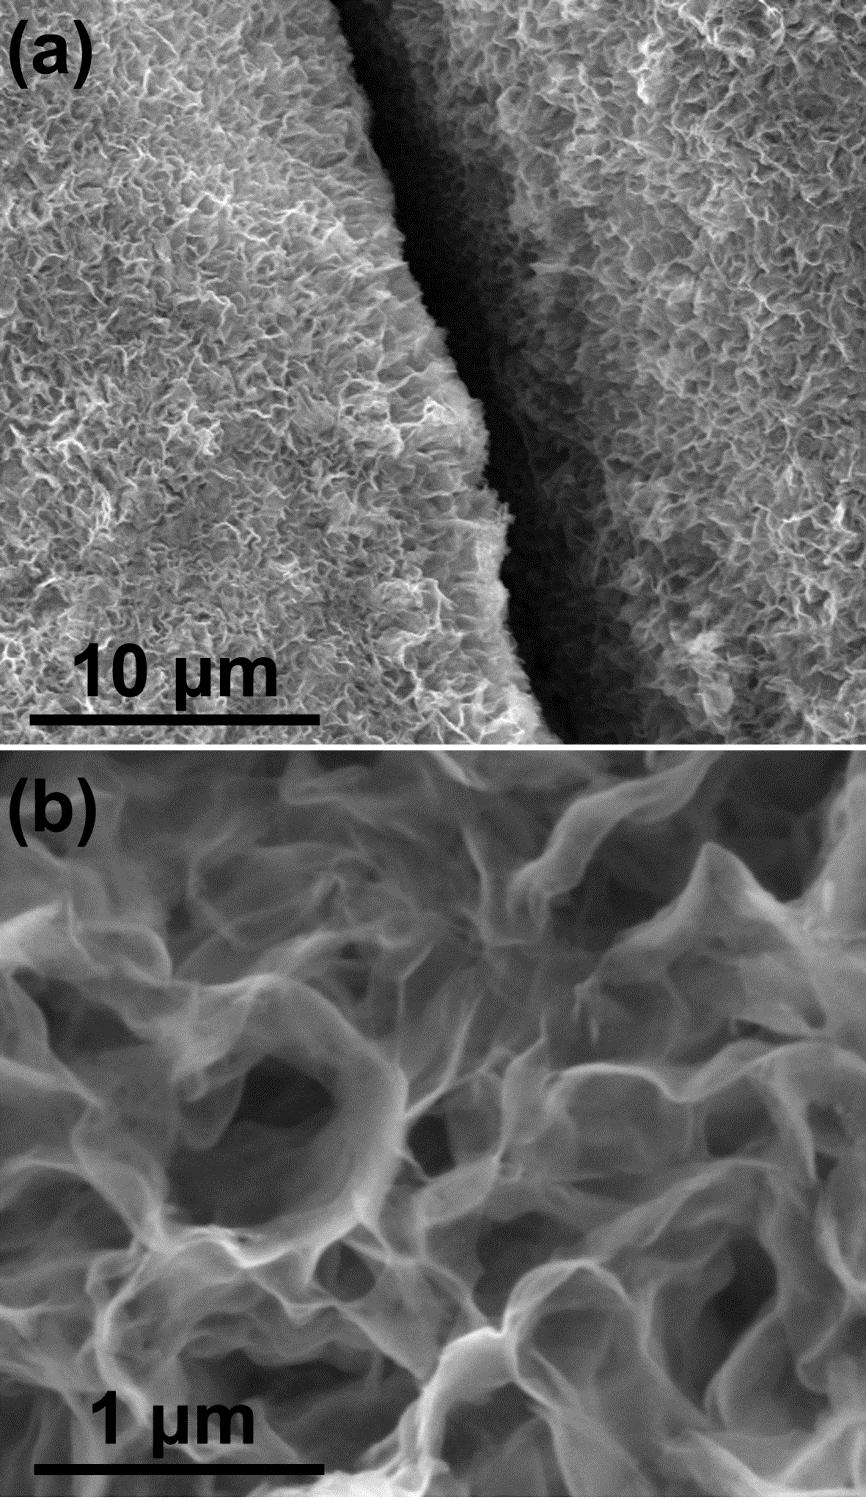 Figure S4. SEM micrographs showing the morphology of the Ni foam supported MnO2 NSs subjected to charge/discharge for 70 cycles at various current densities.